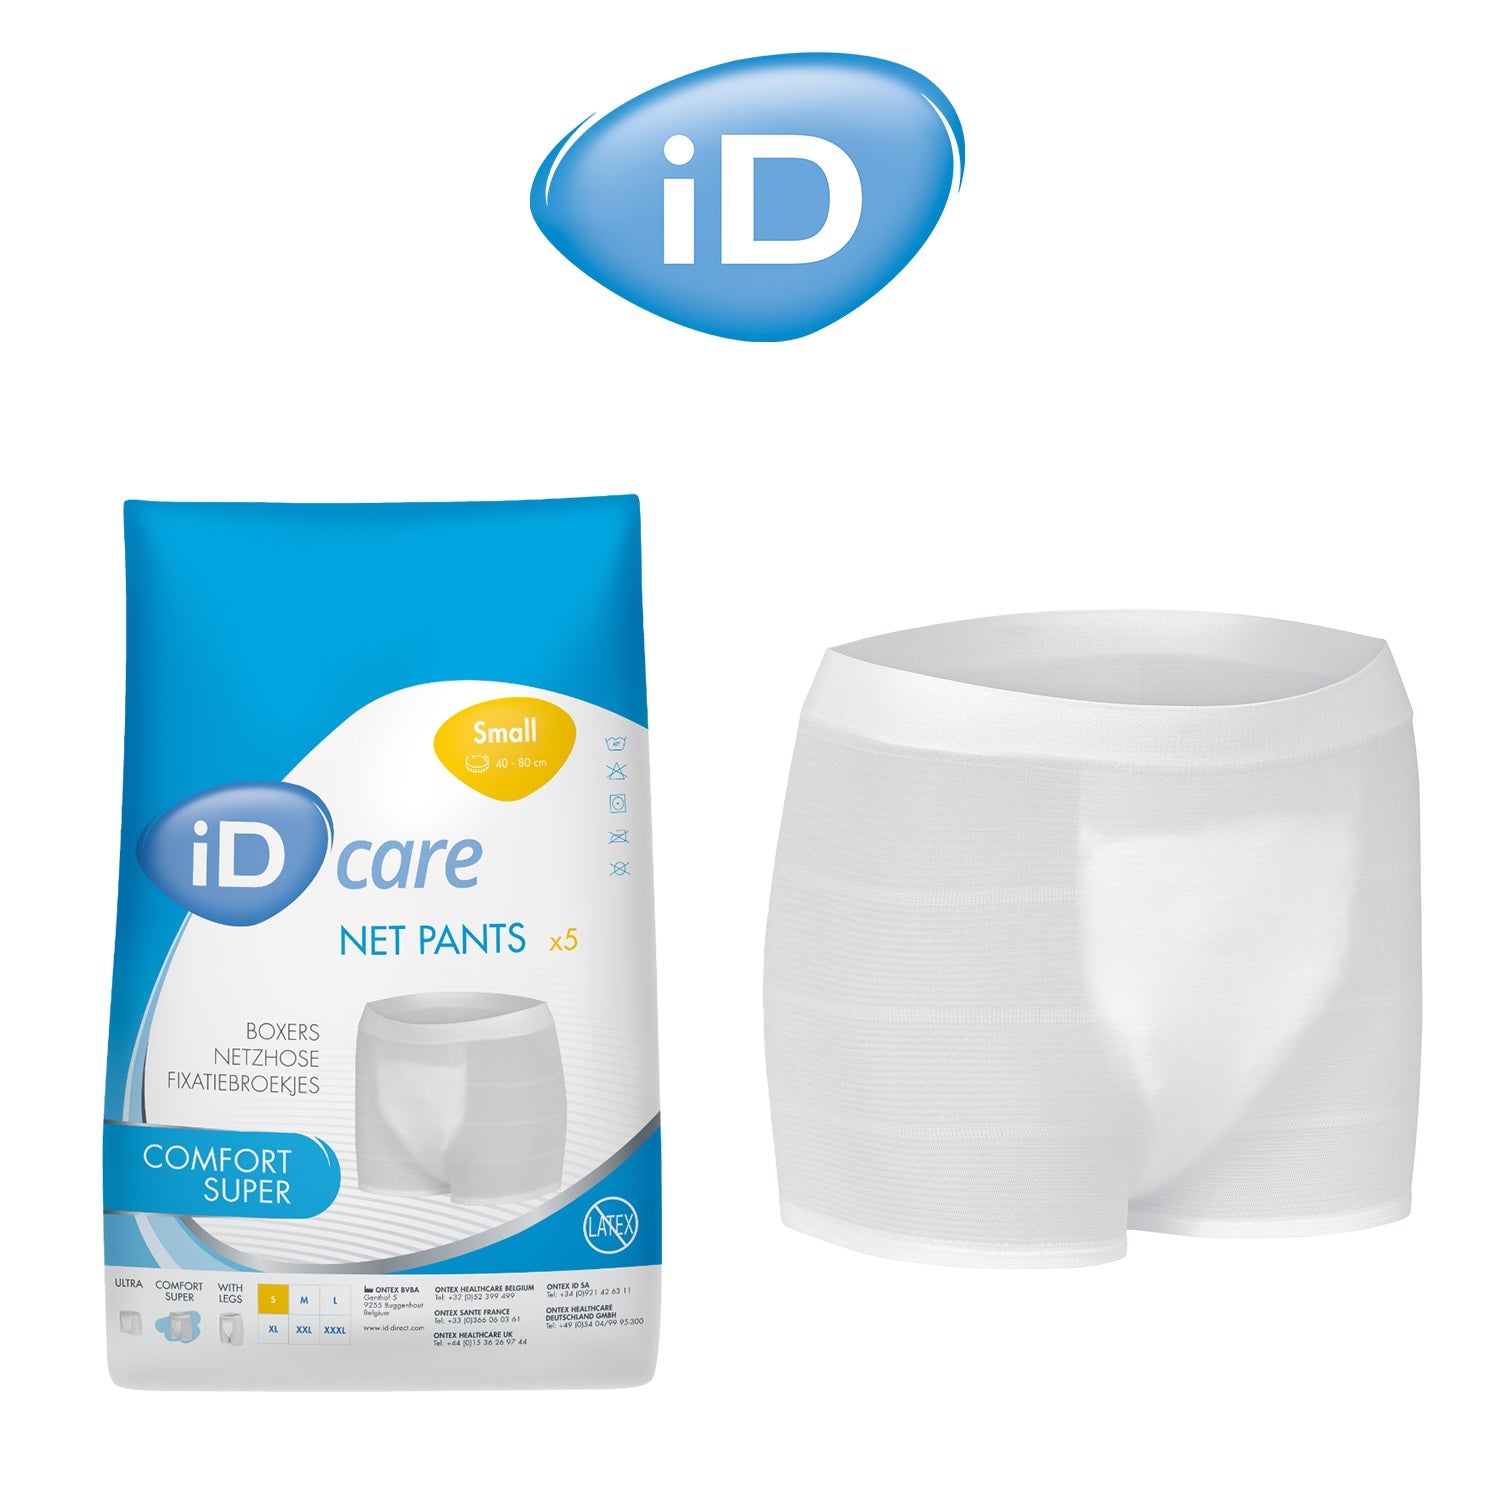 iD Care Net Pants Comfort Super | Small | Pack of 5 (5)